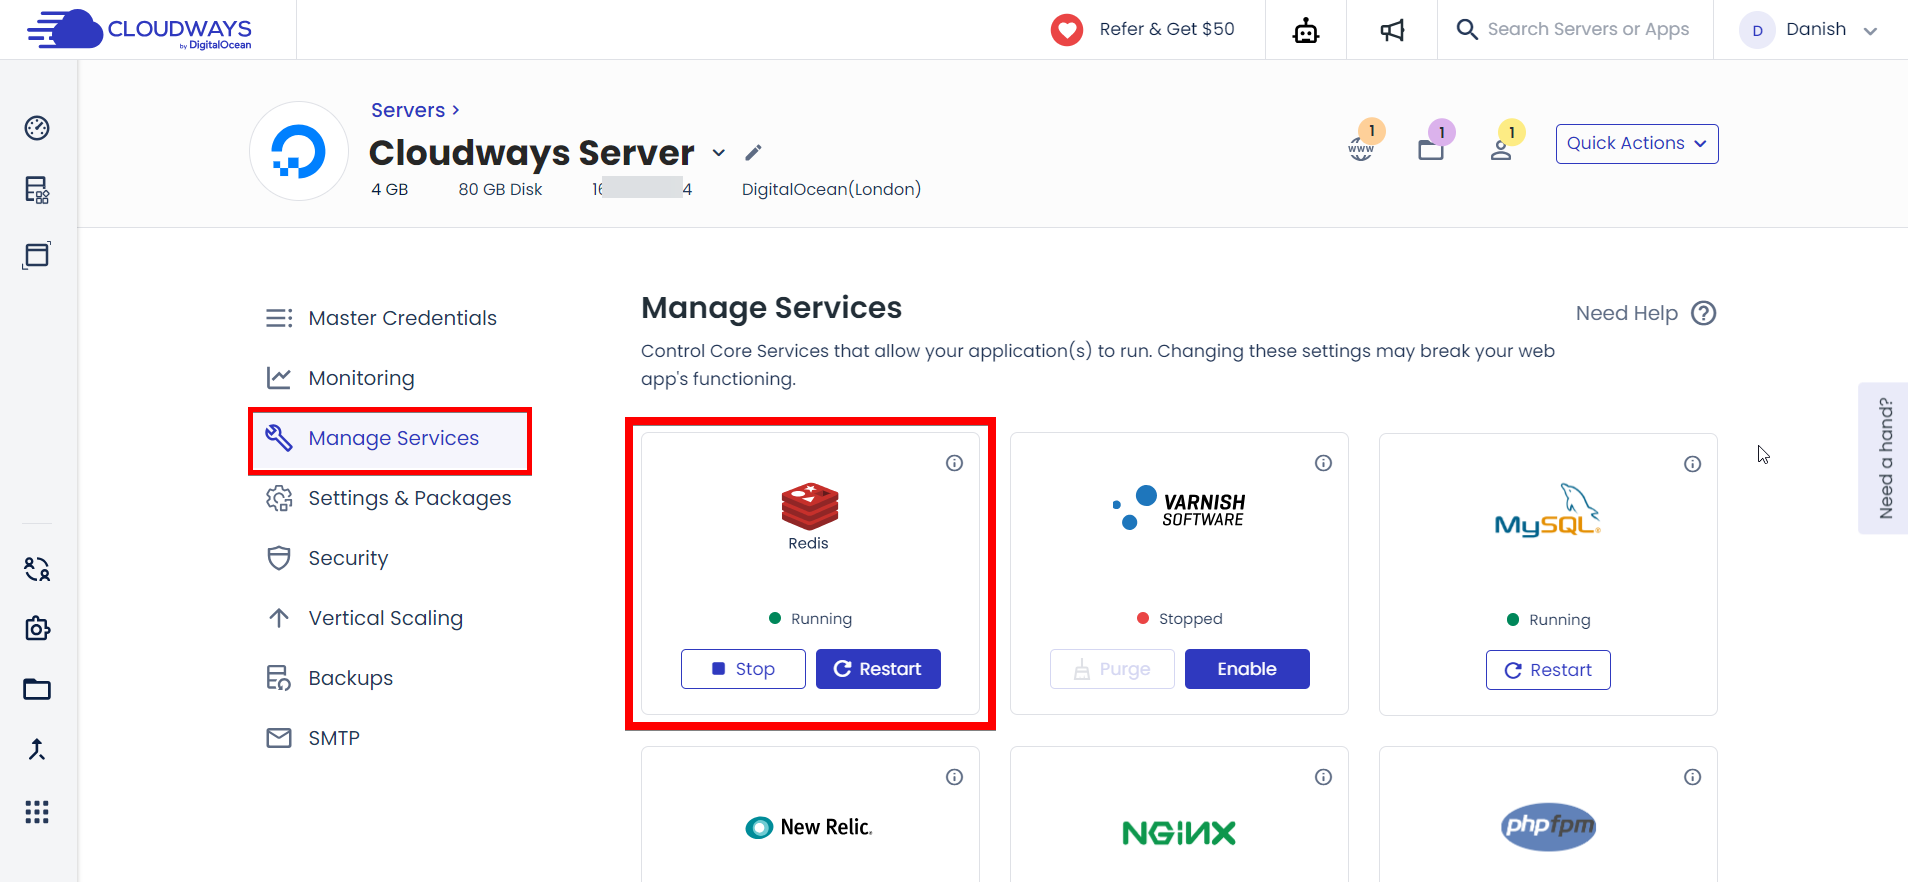 Cloudways Settings and Packages - Redis